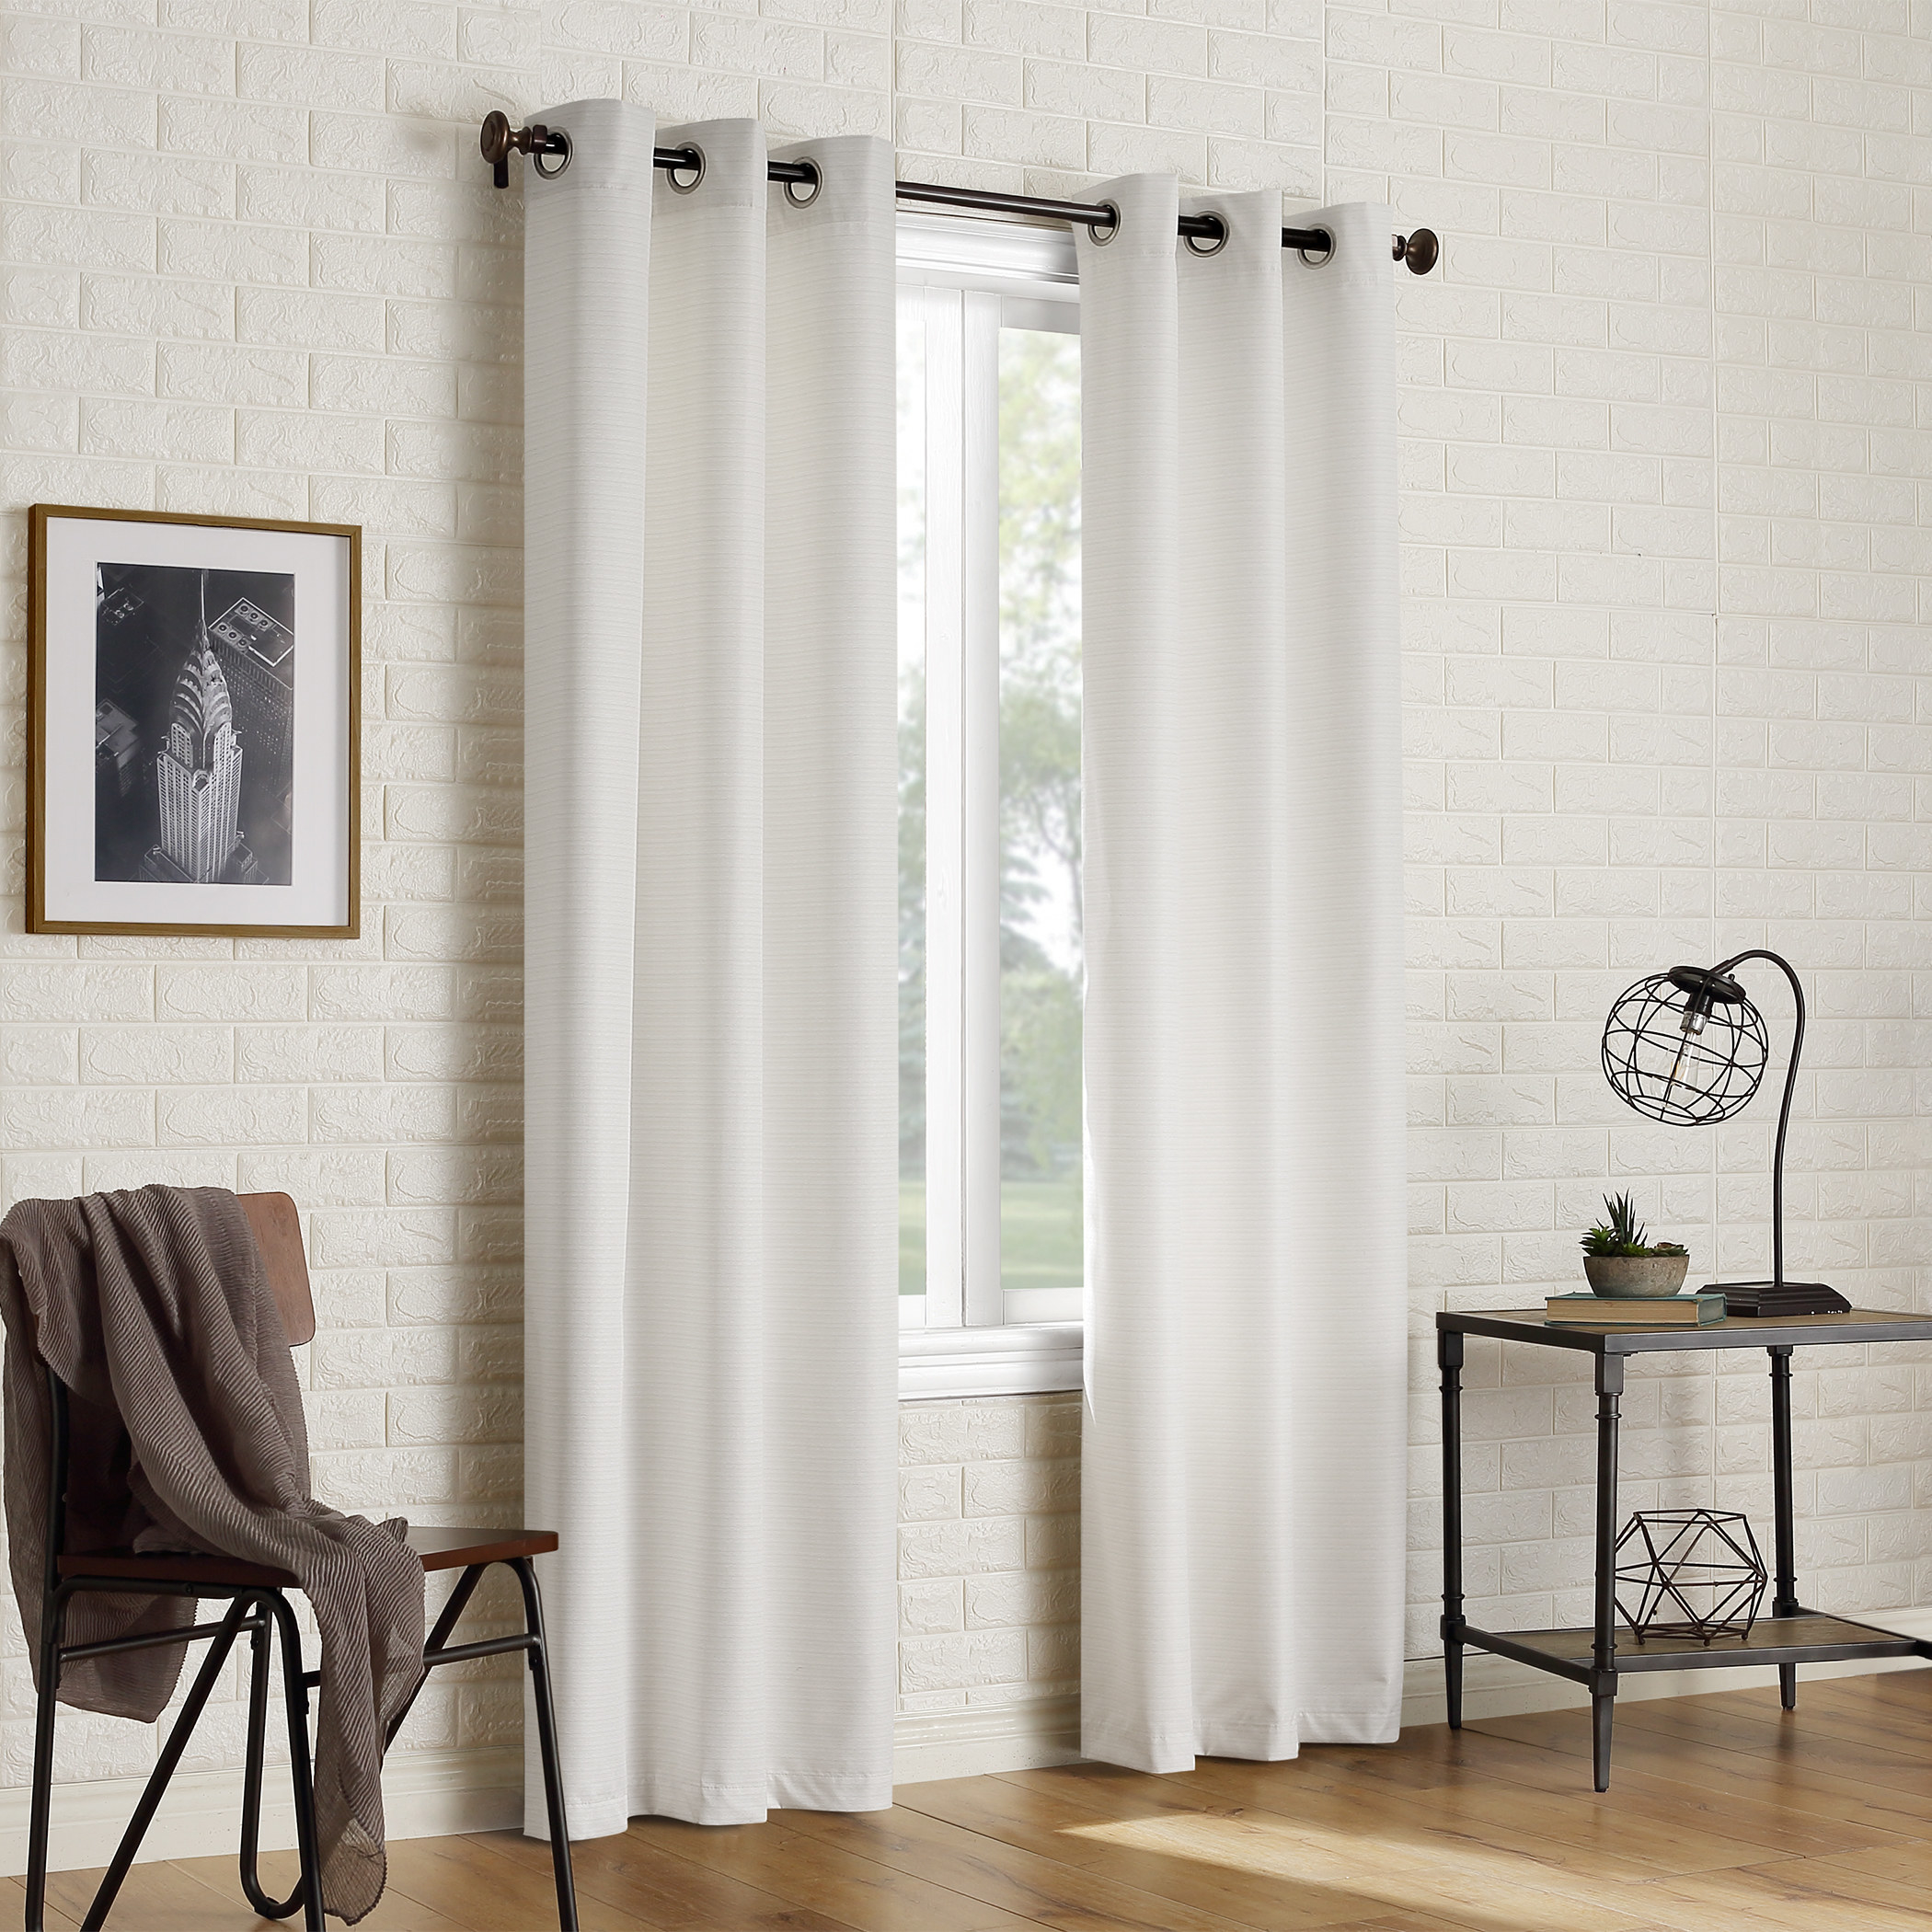 the white curtains in a decorated living space